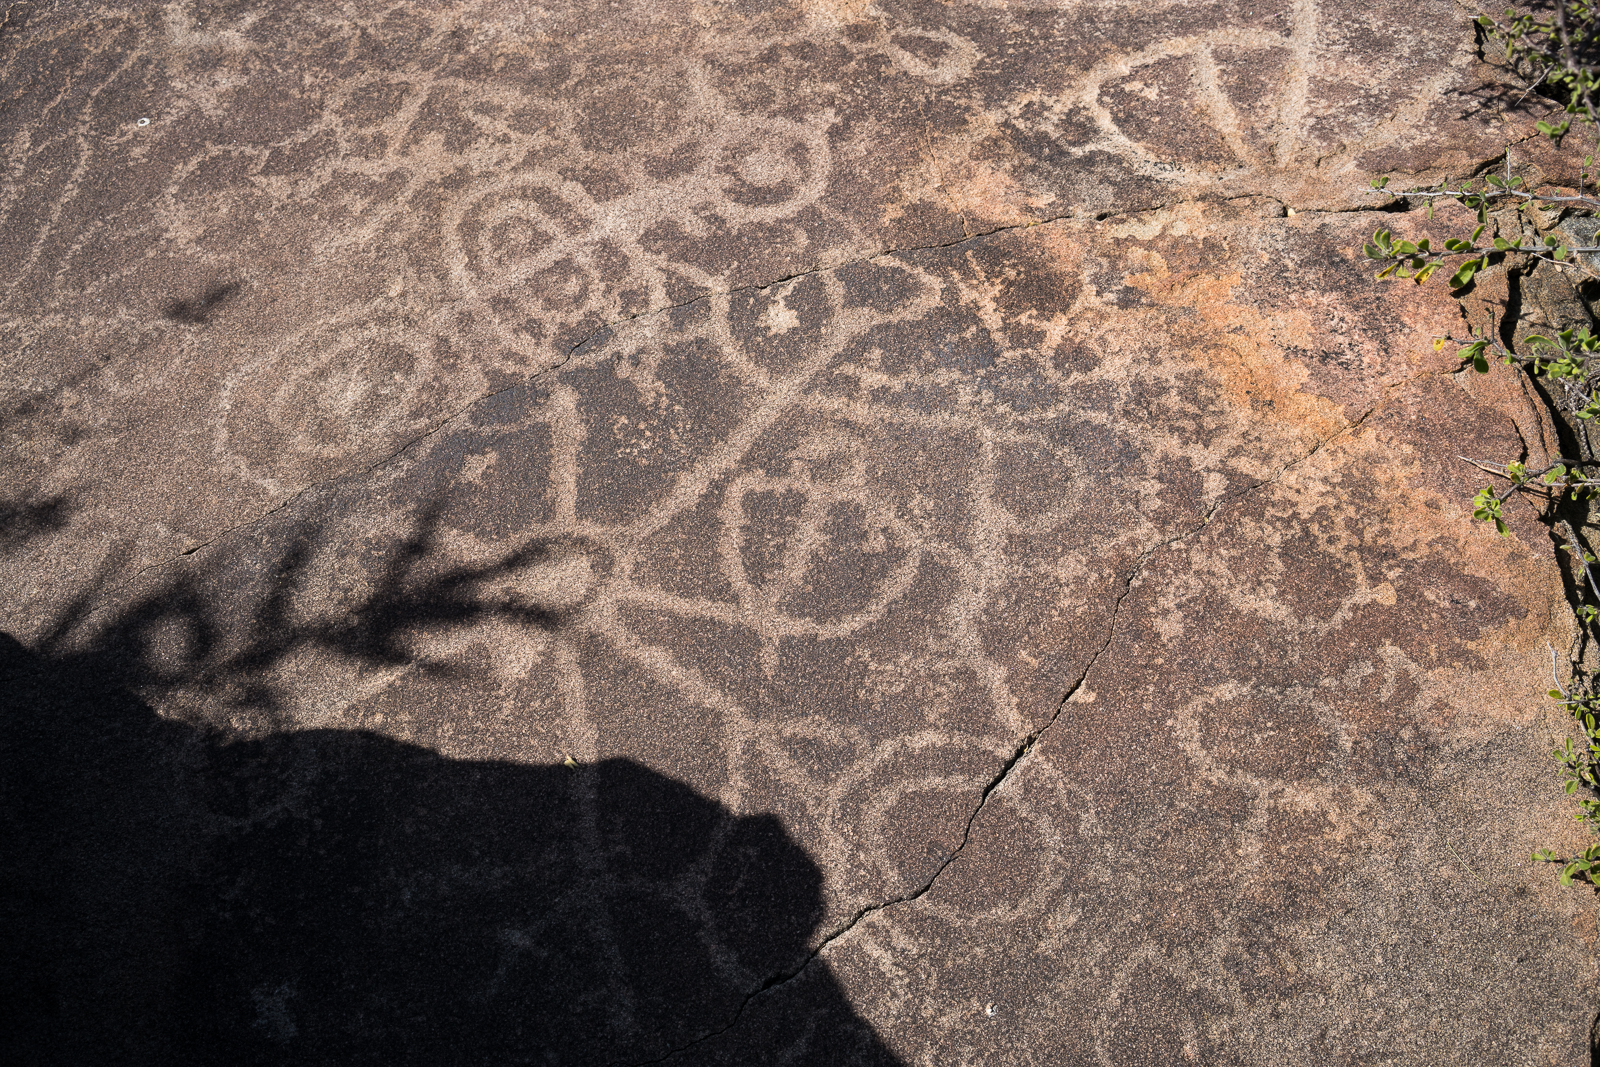 A panel of petroglyphs in the Sutherland Rock Art District. January 2016.